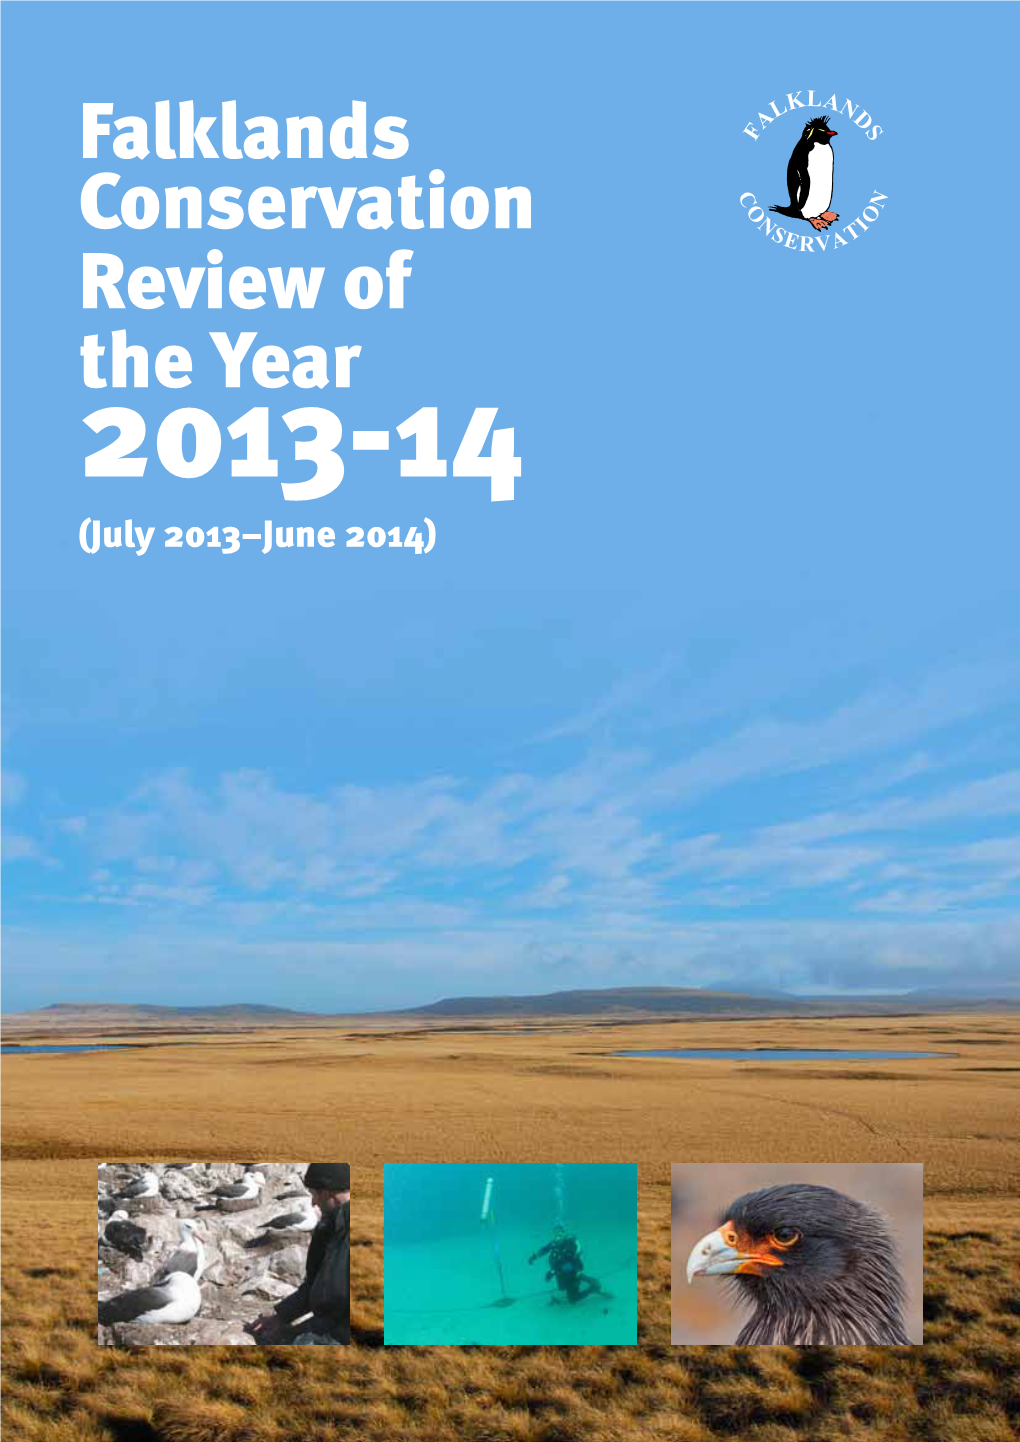 Falklands Conservation Review of the Year